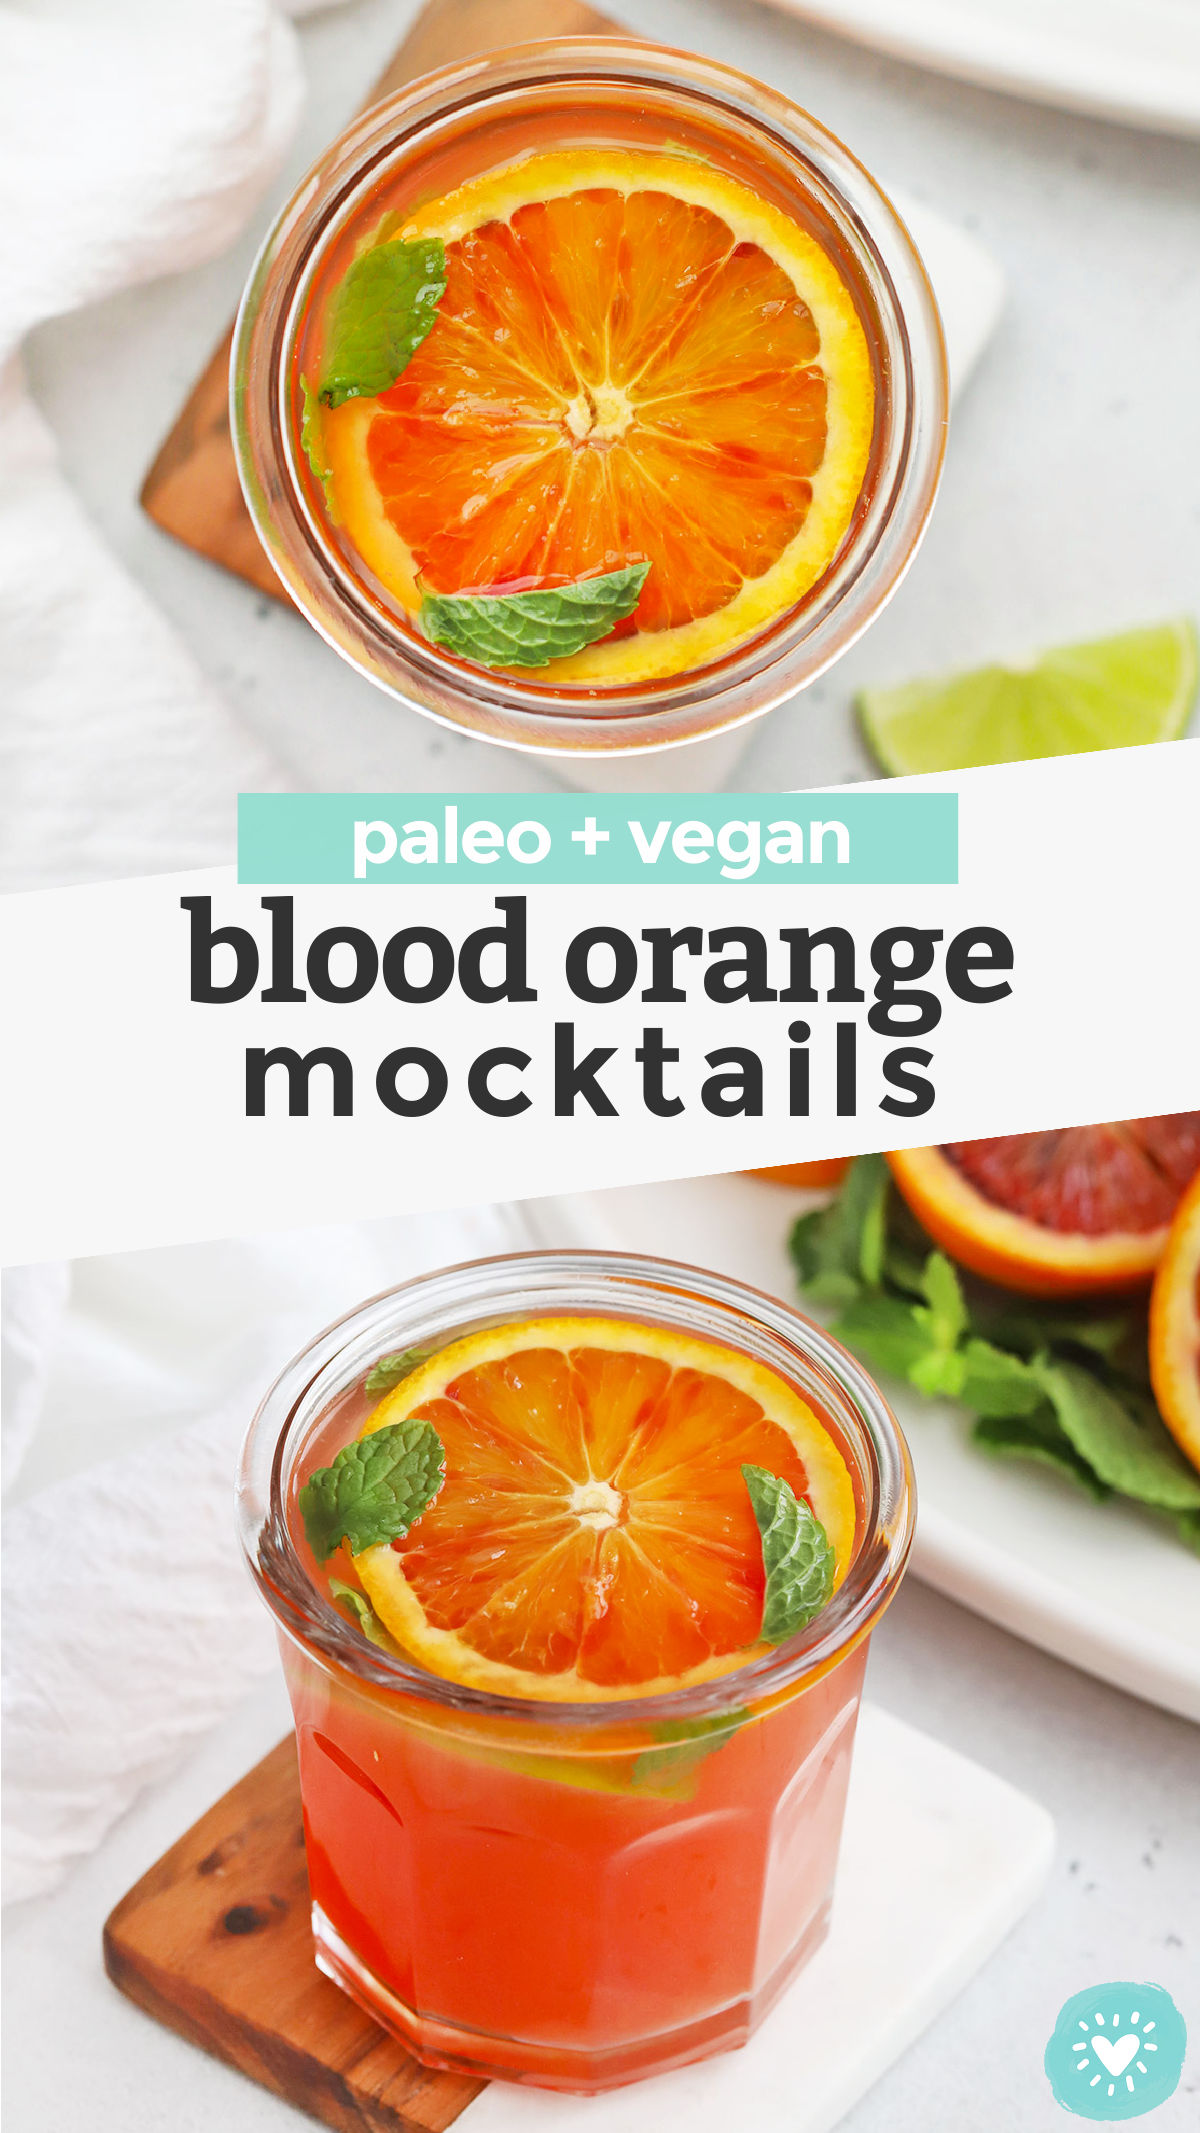 Blood Orange Mocktail - these naturally sweetened citrus mocktails are perfect for the holidays. Make the most of citrus season with these gorgeous non-alcoholic blood orange cocktails! (Paleo + Vegan!) // Holiday Mocktail // Winter Mocktail // New Year's Eve Mocktail // Citrus Mocktail Recipe // Paleo Mocktail // Vegan Mocktail // Non-Alcoholic Blood Orange Cocktail #mocktail